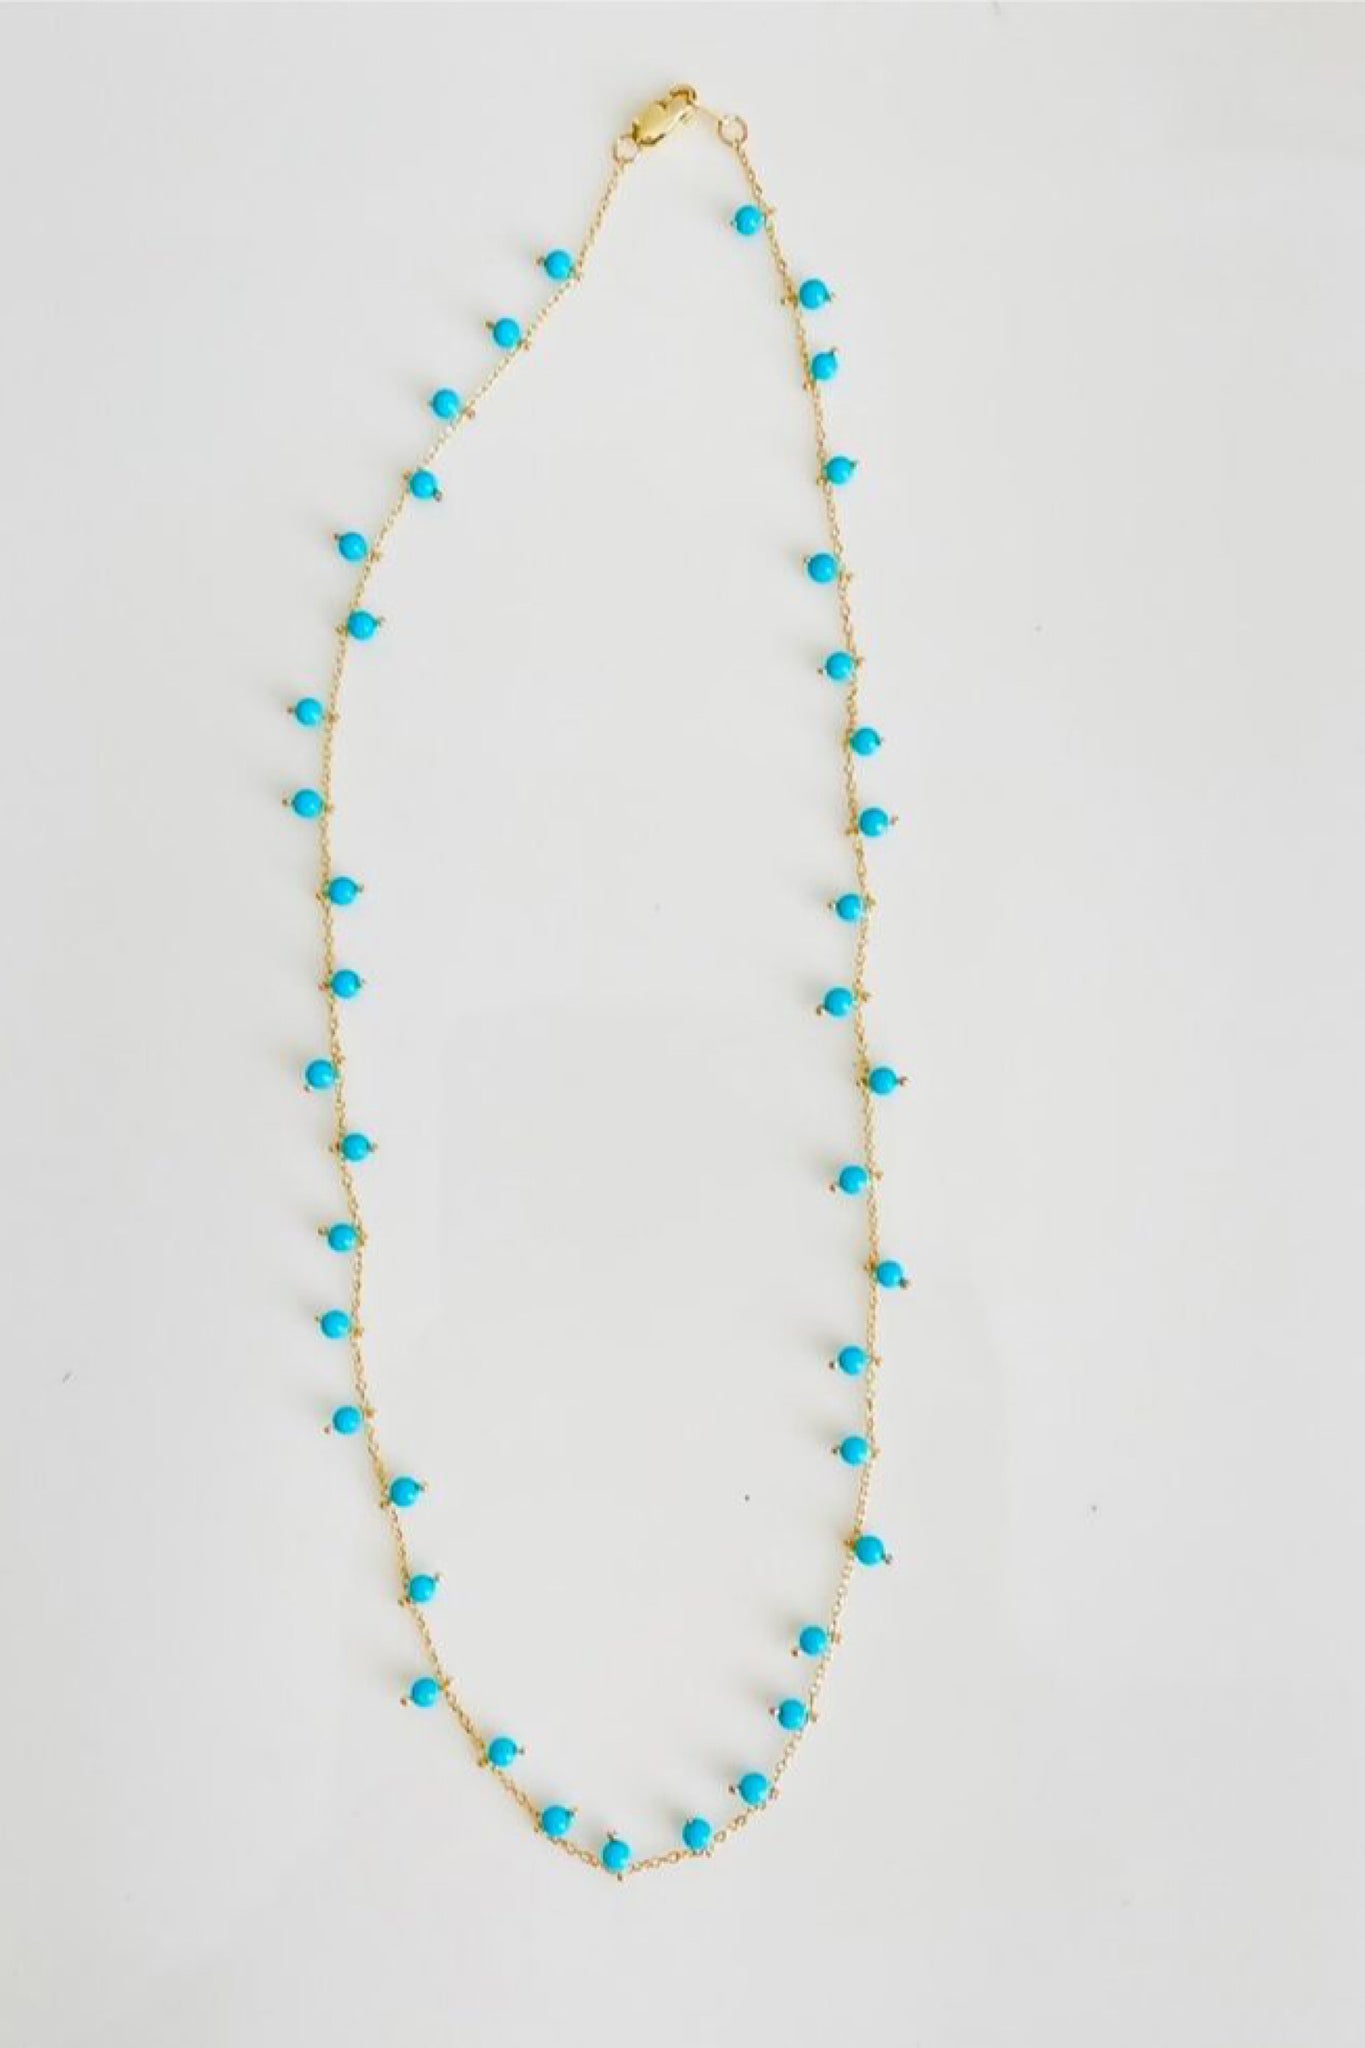 Turquoise Ball Necklace